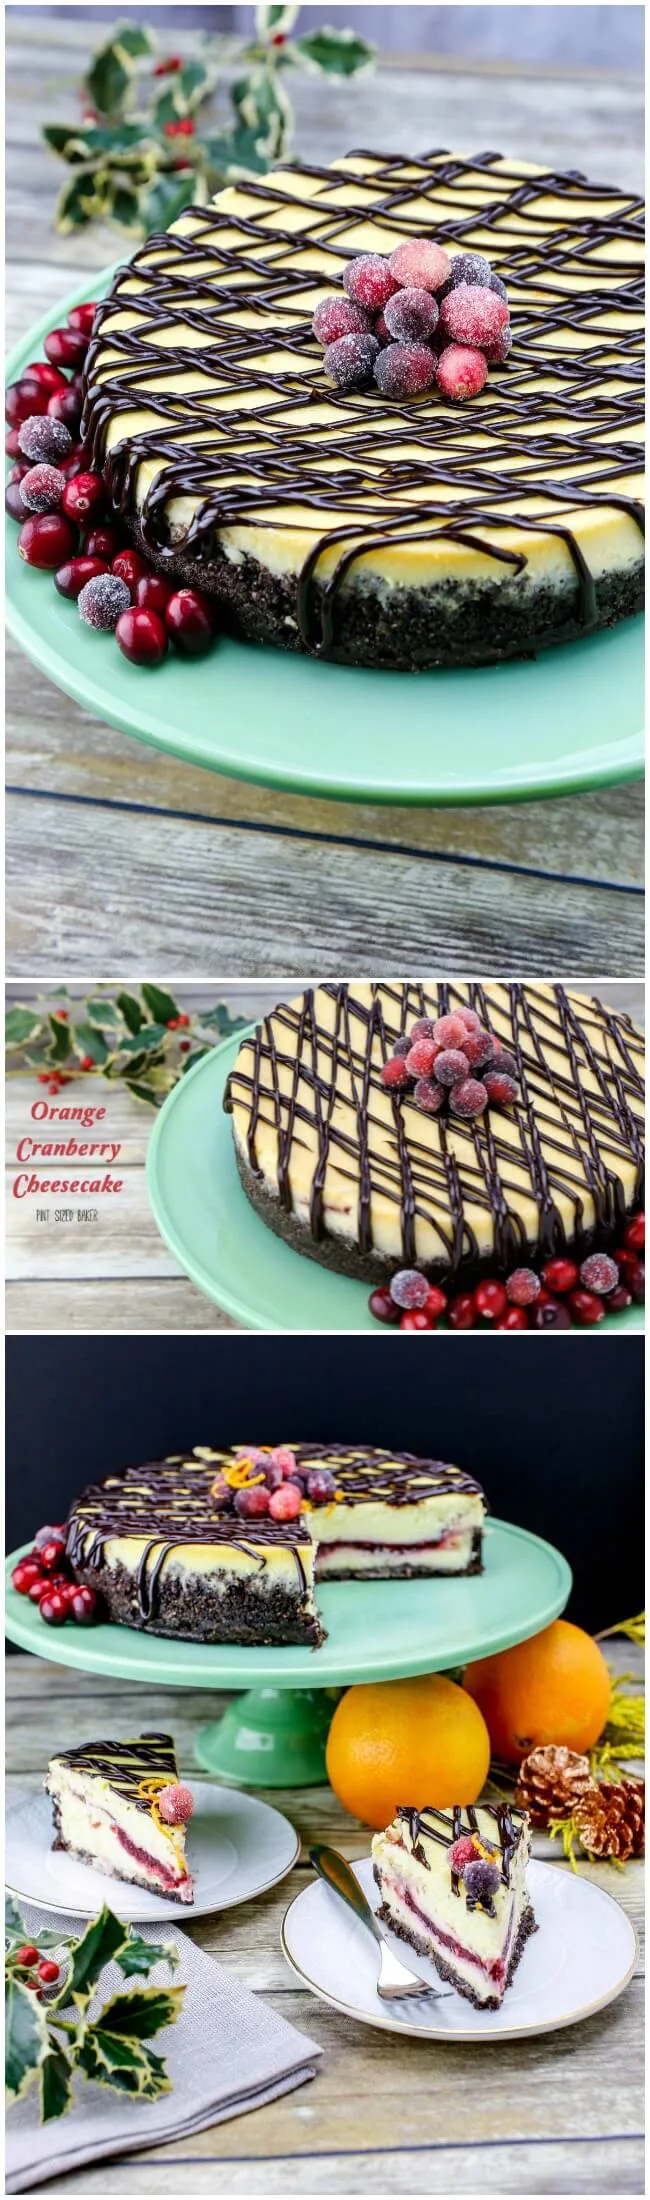 This holiday season enjoy this Cranberry Orange Cheesecake Recipe with your family and friends with great conversation and a cup of coffee.